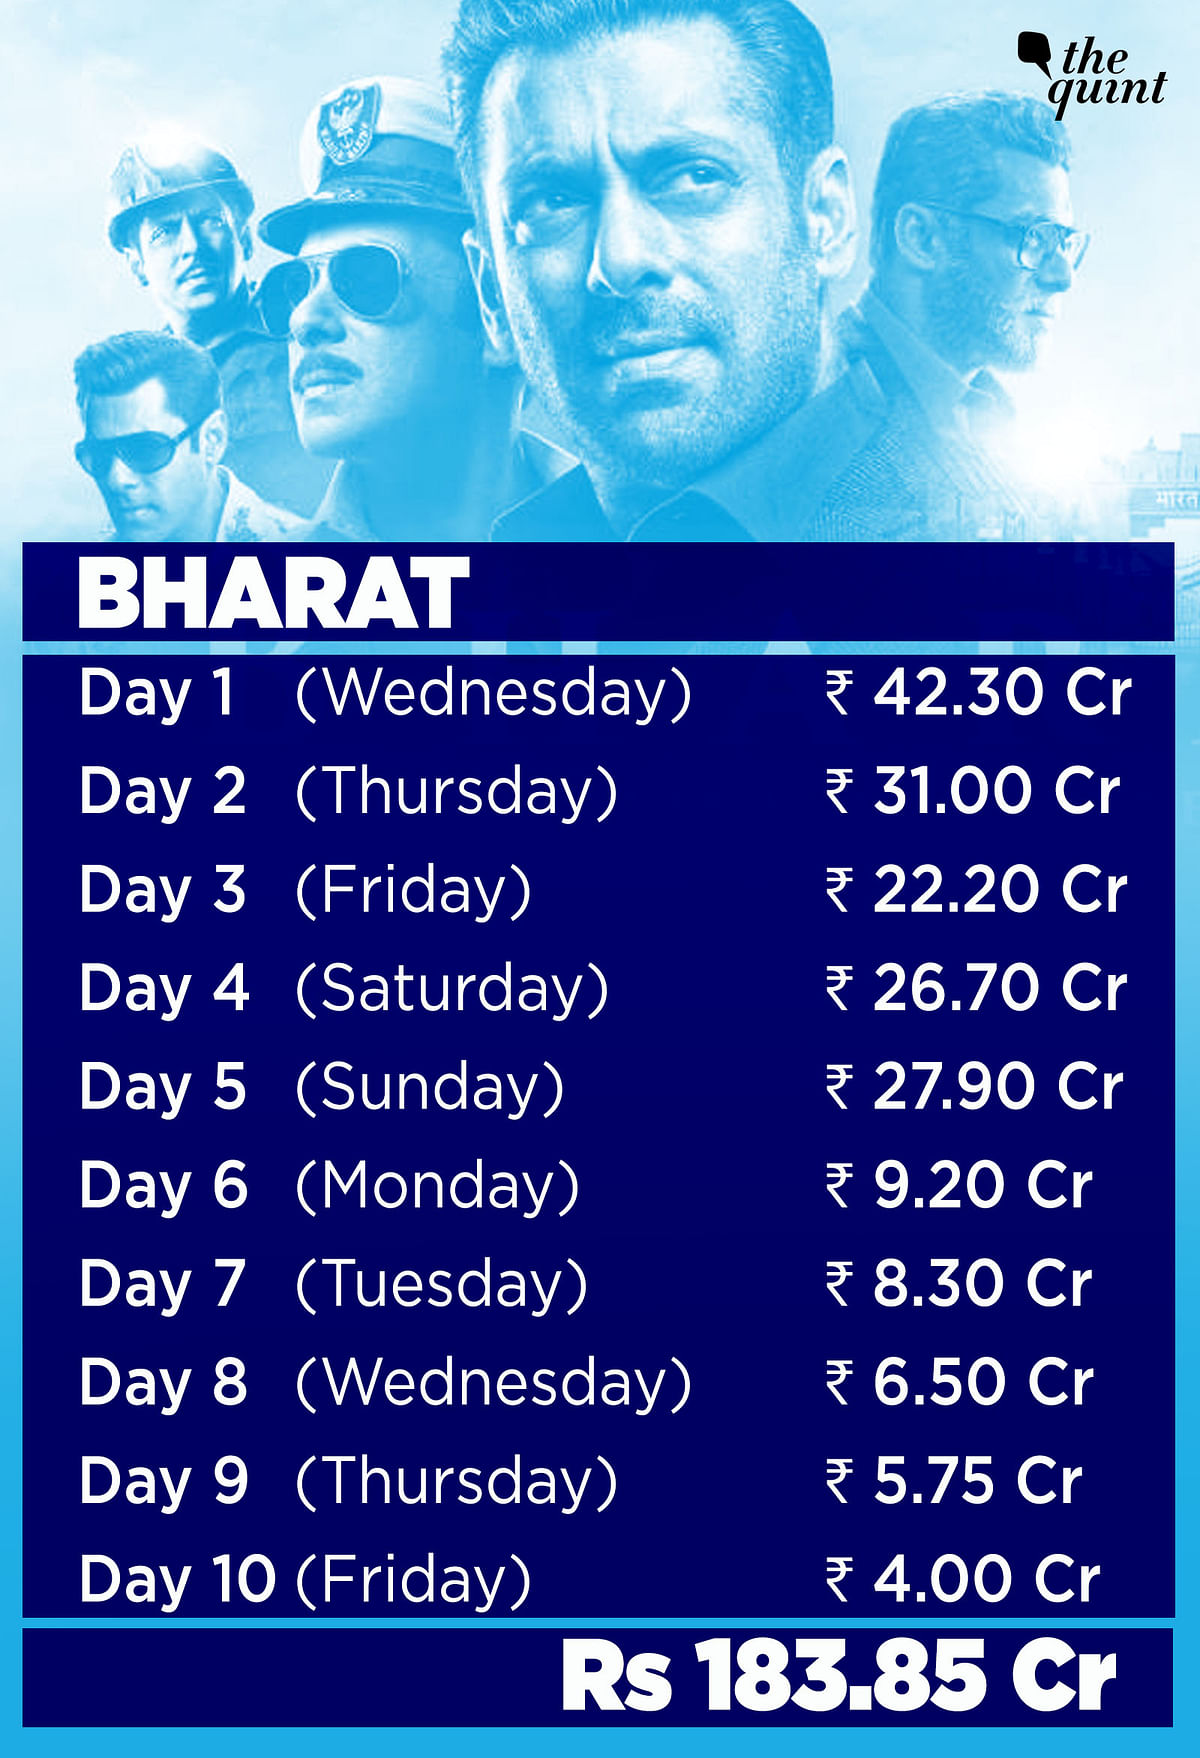 ‘Bharat’ isn’t the big success it’s being made out to be.